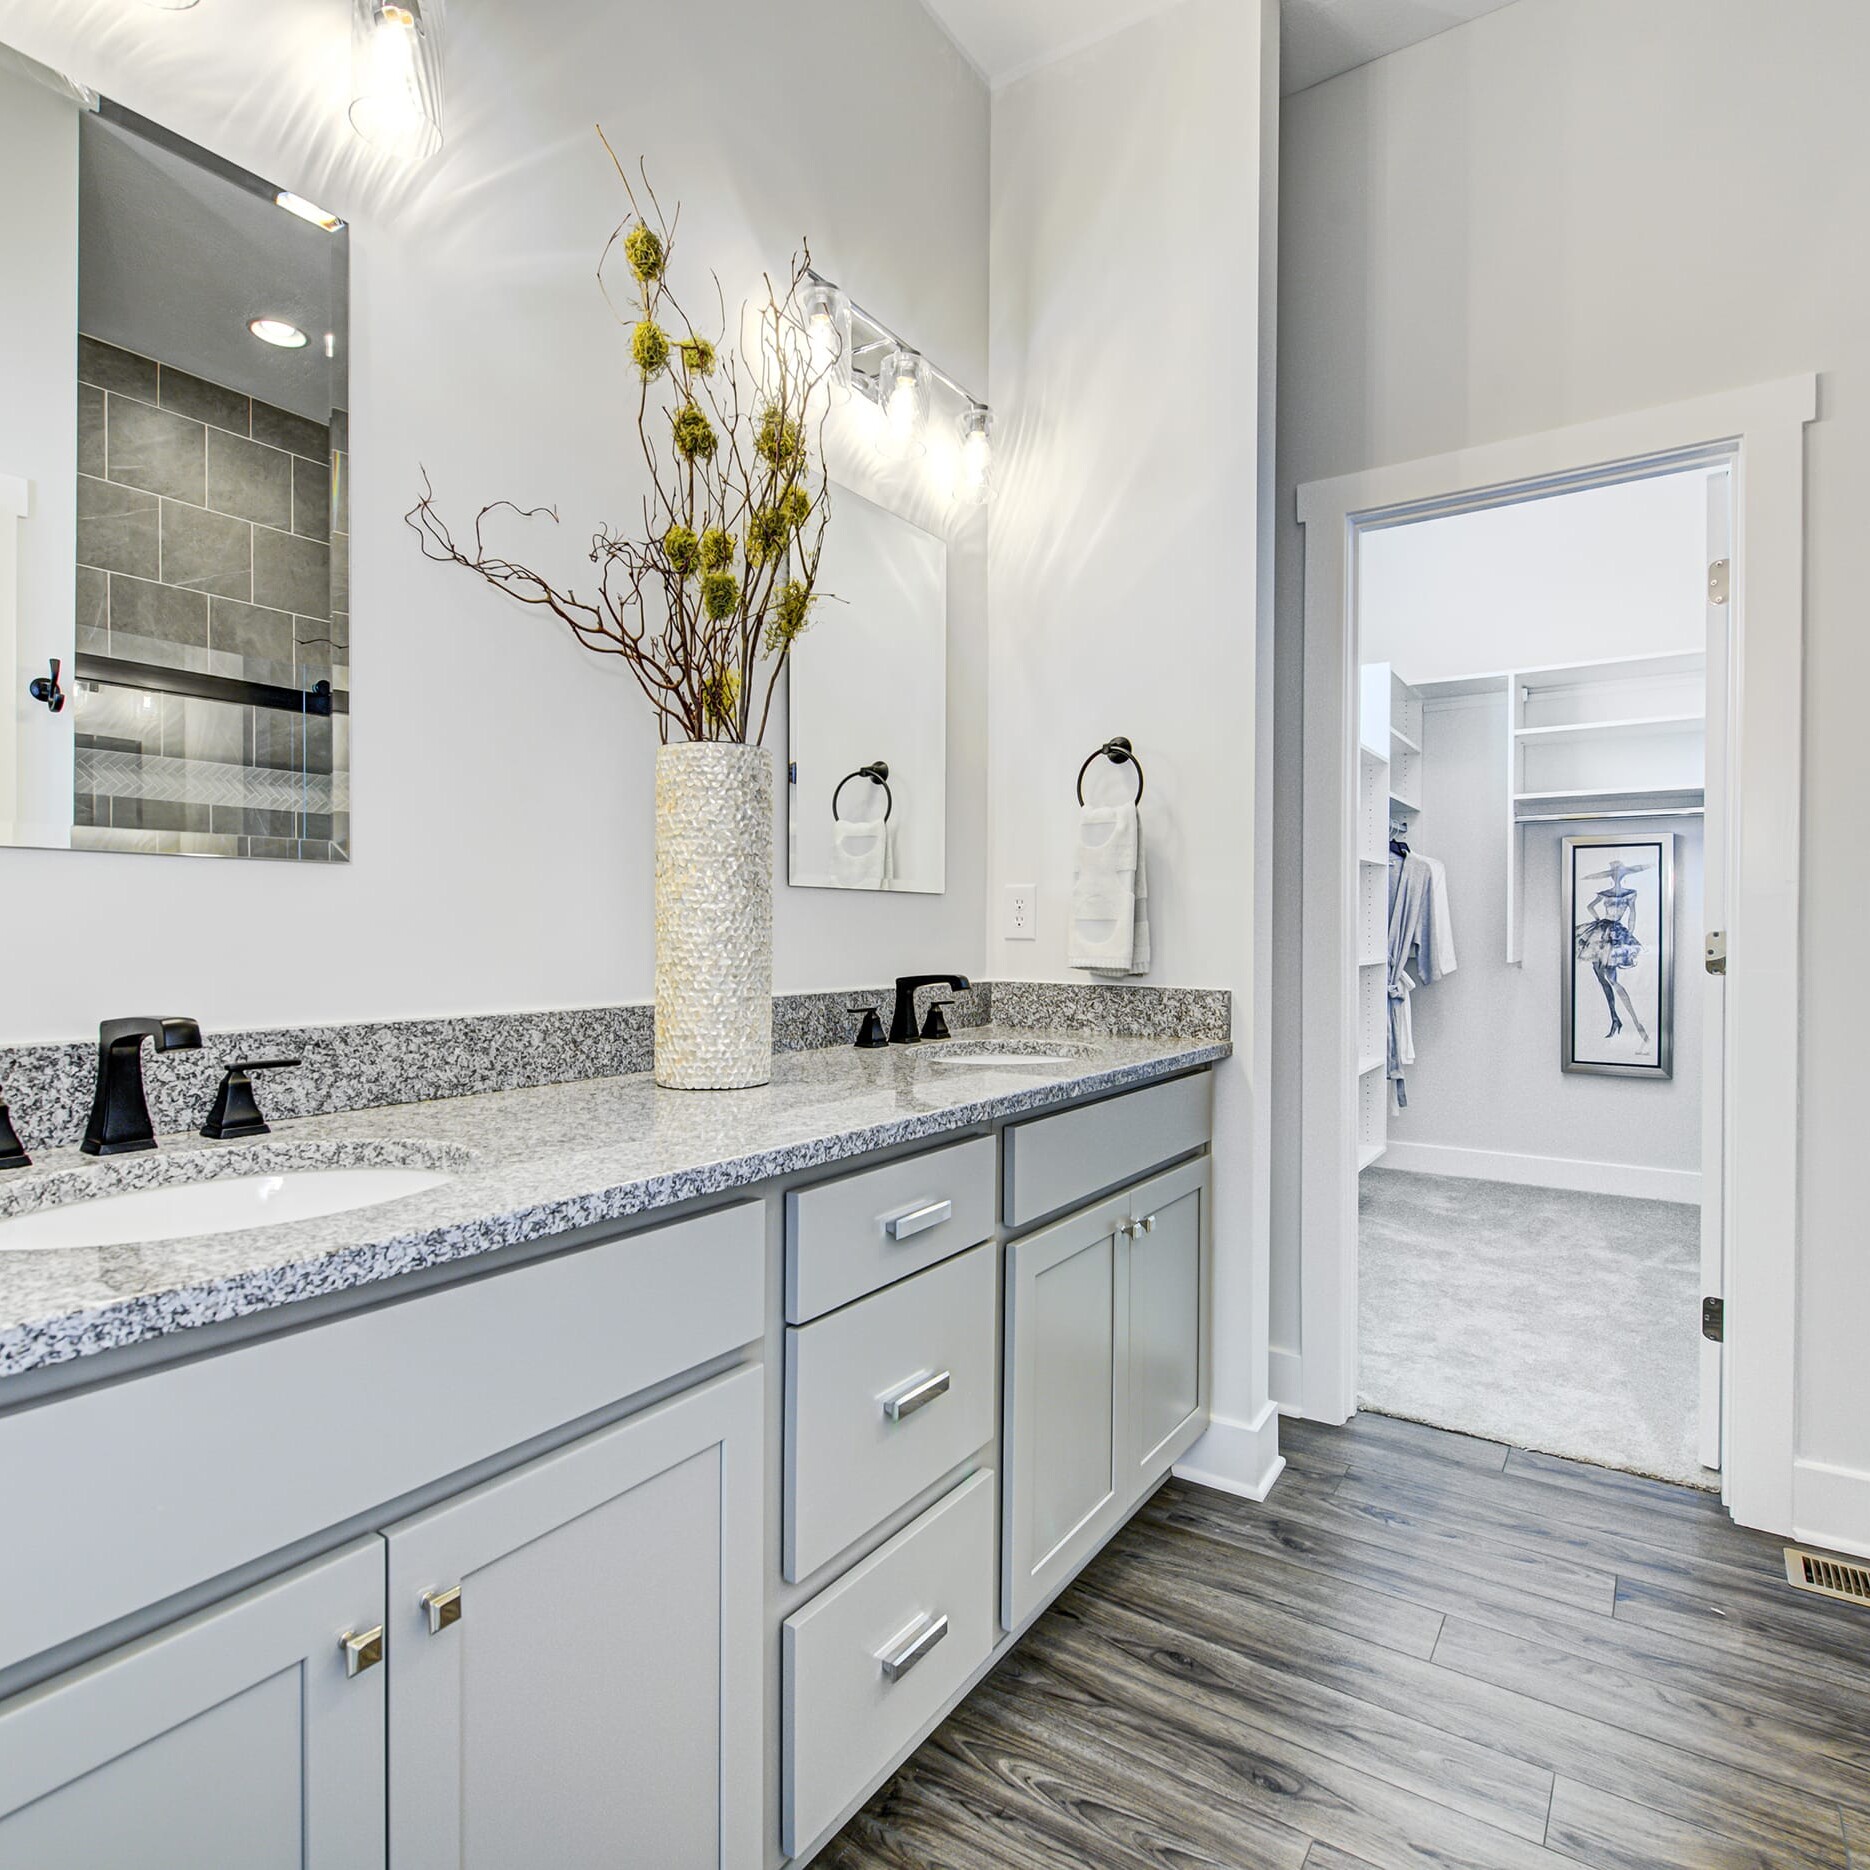 A bathroom with gray cabinets and granite counter tops.